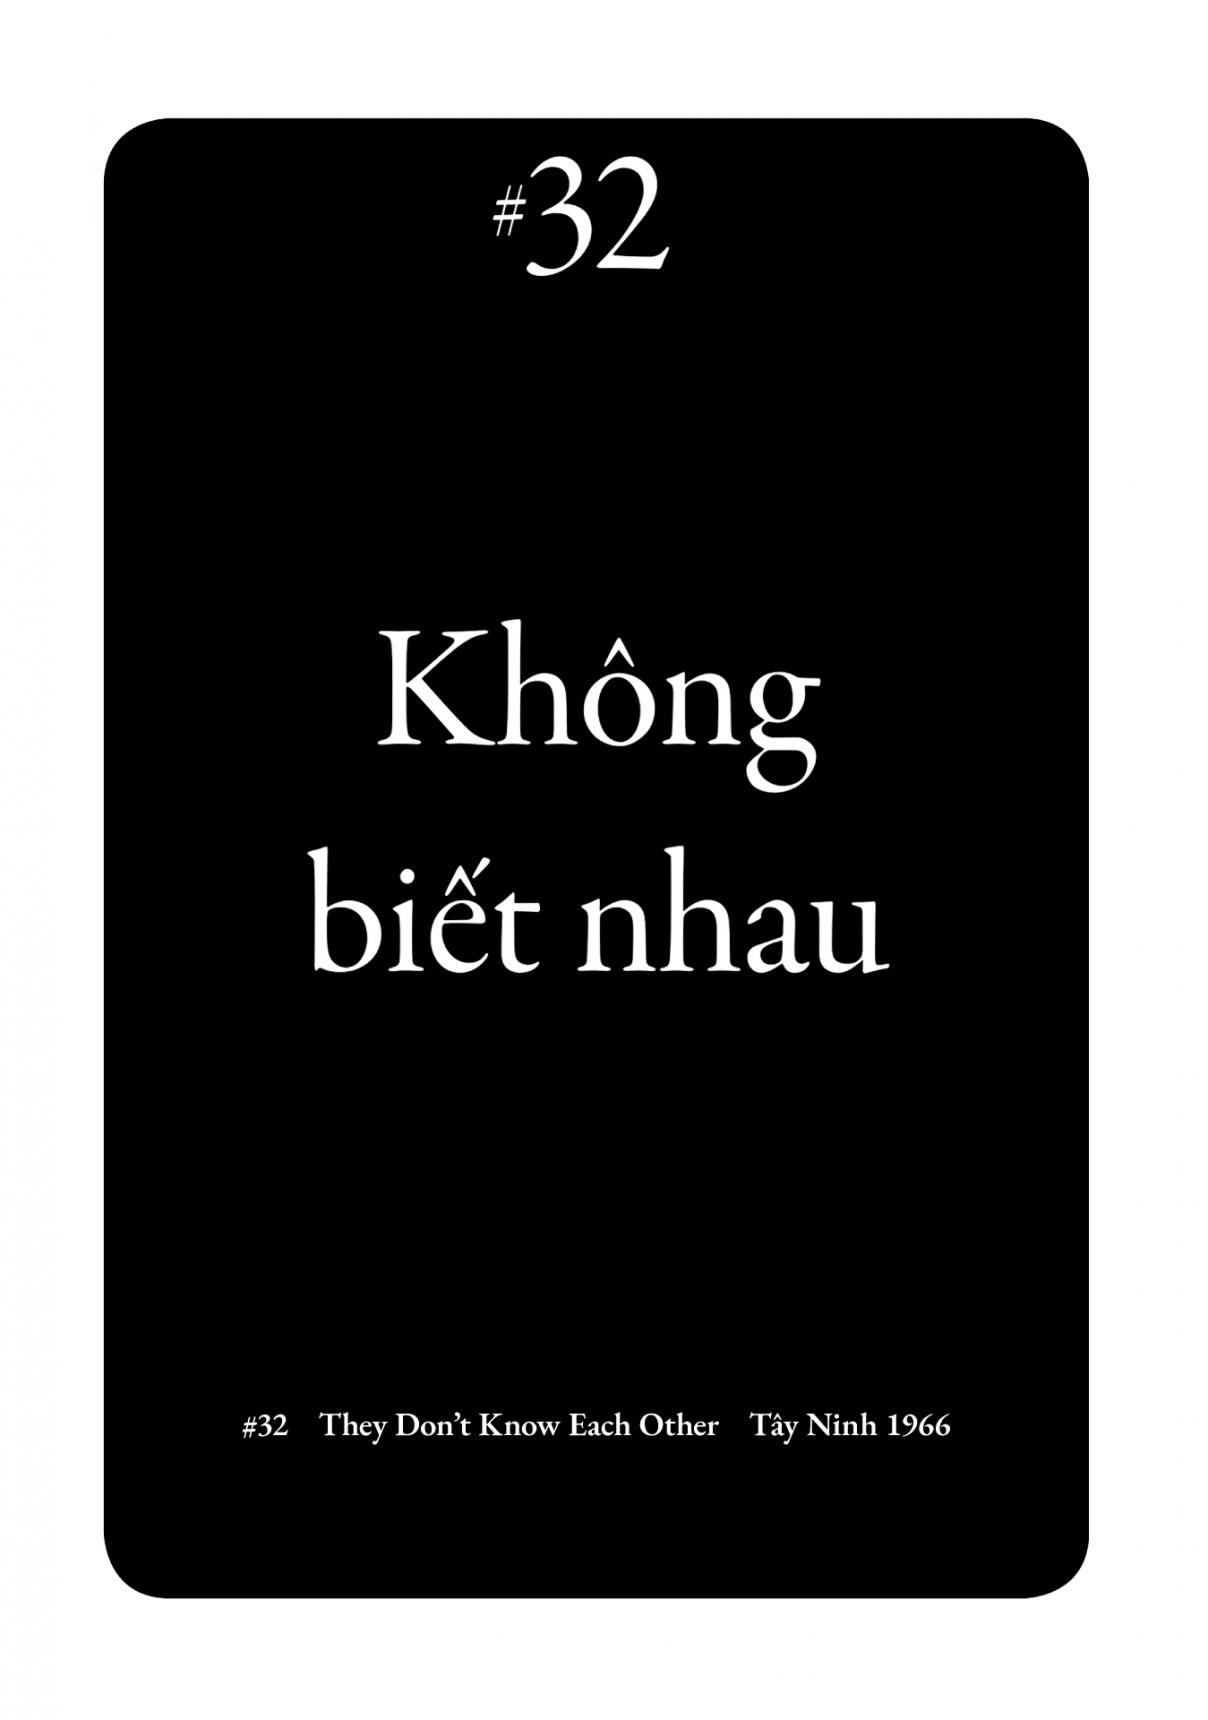 Dien Bien Phu Vol. 6 Ch. 32 They Don't Know Each Other